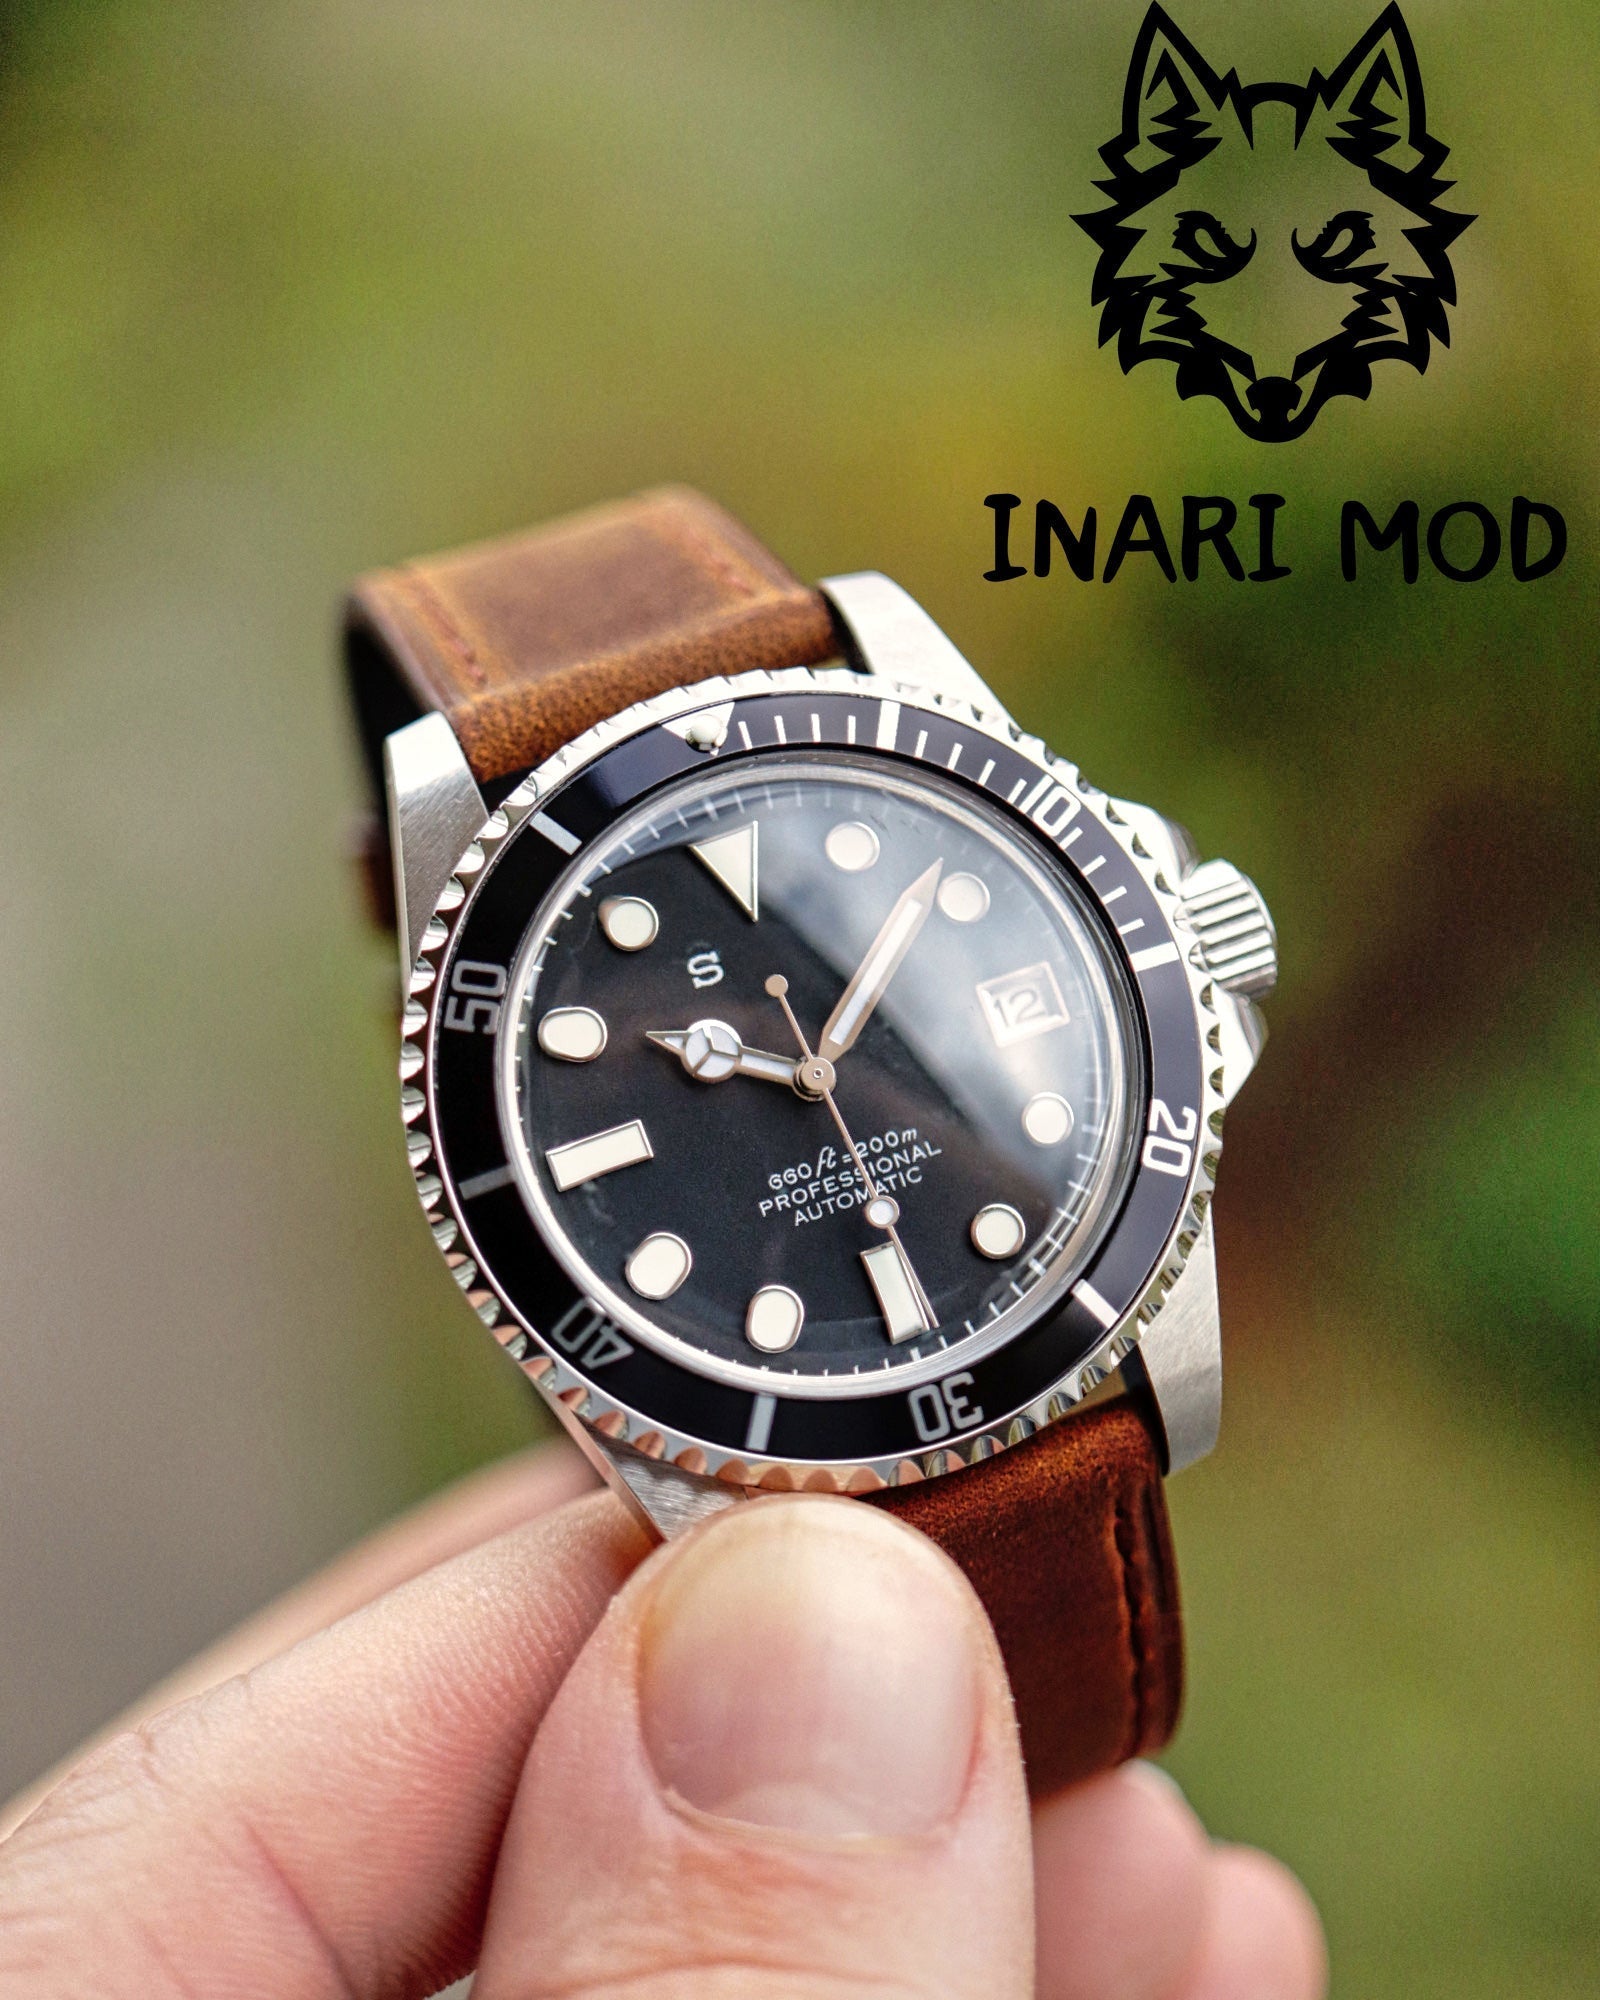 Seiko Mod Submariner Vintage from Inarimod for just 269.90€